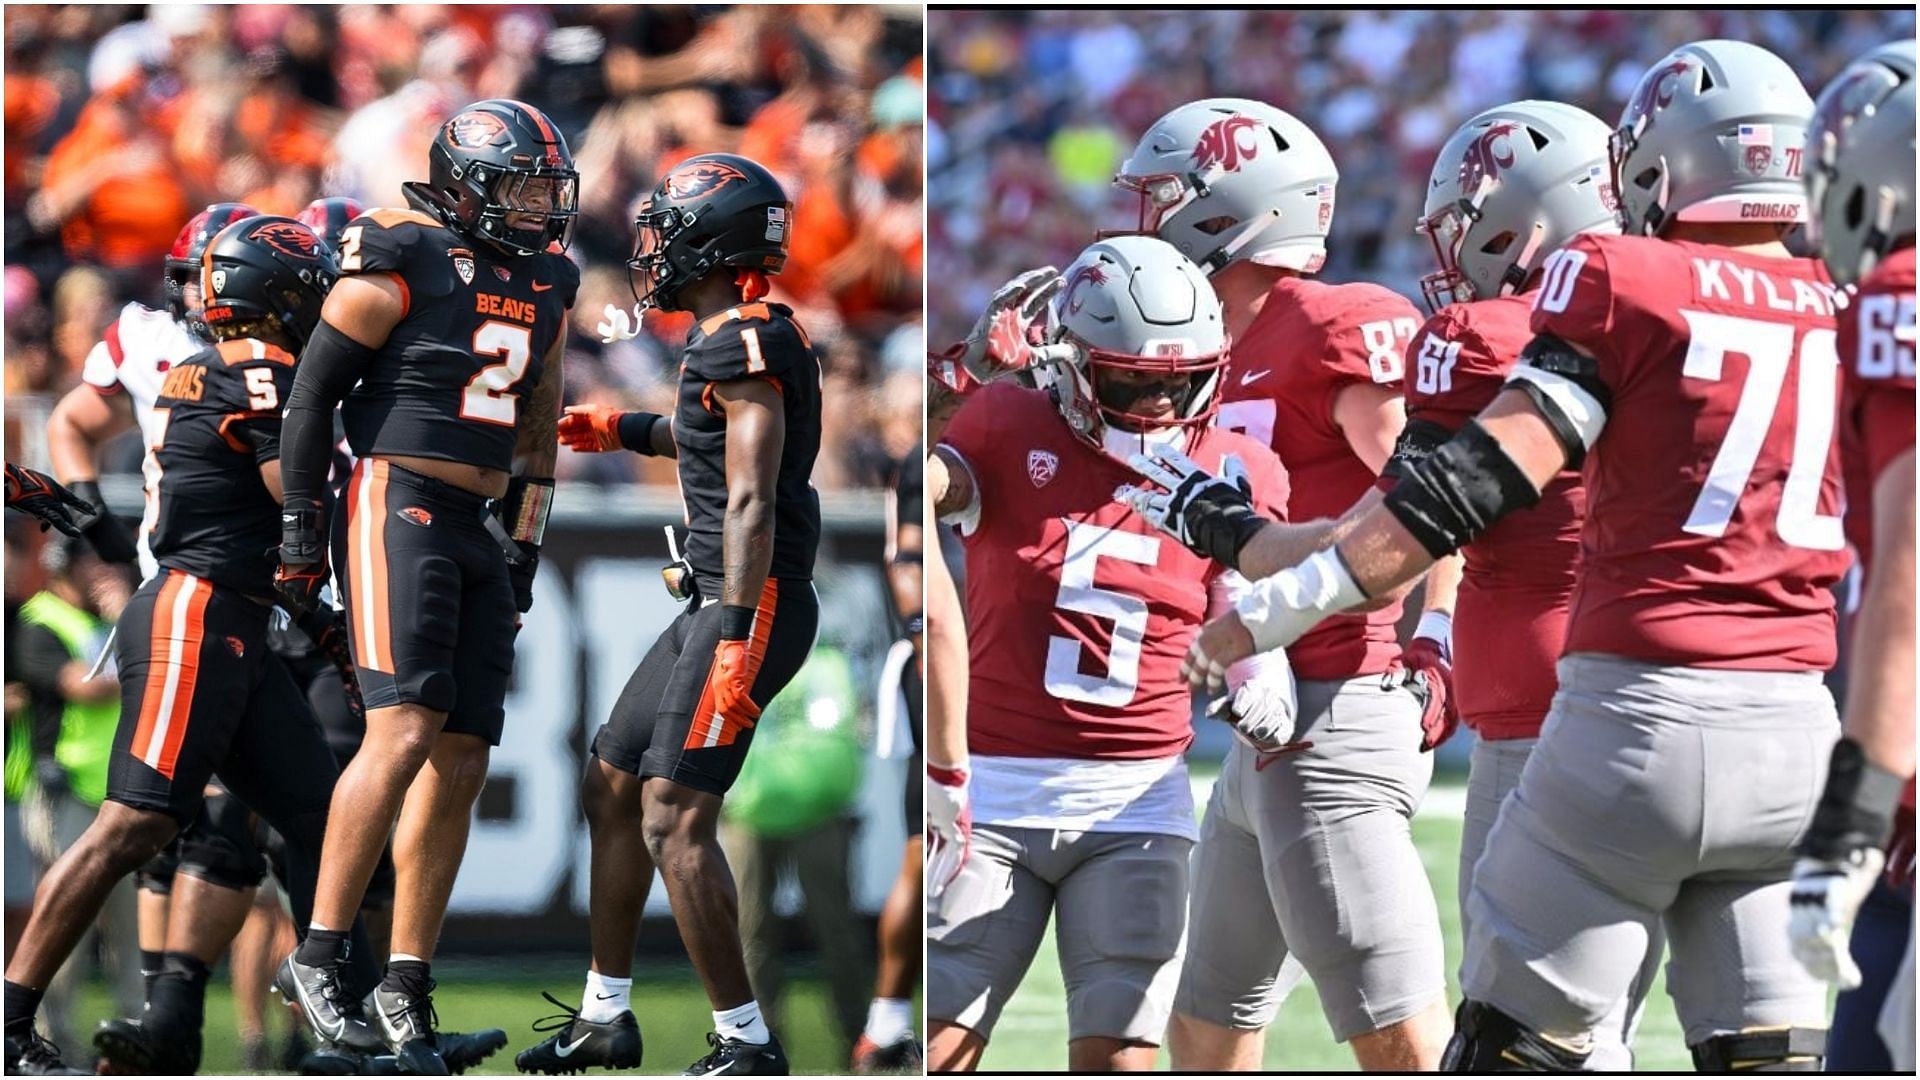 The Oregon State Beavers will clash with the Washington State Cougars on the weekend